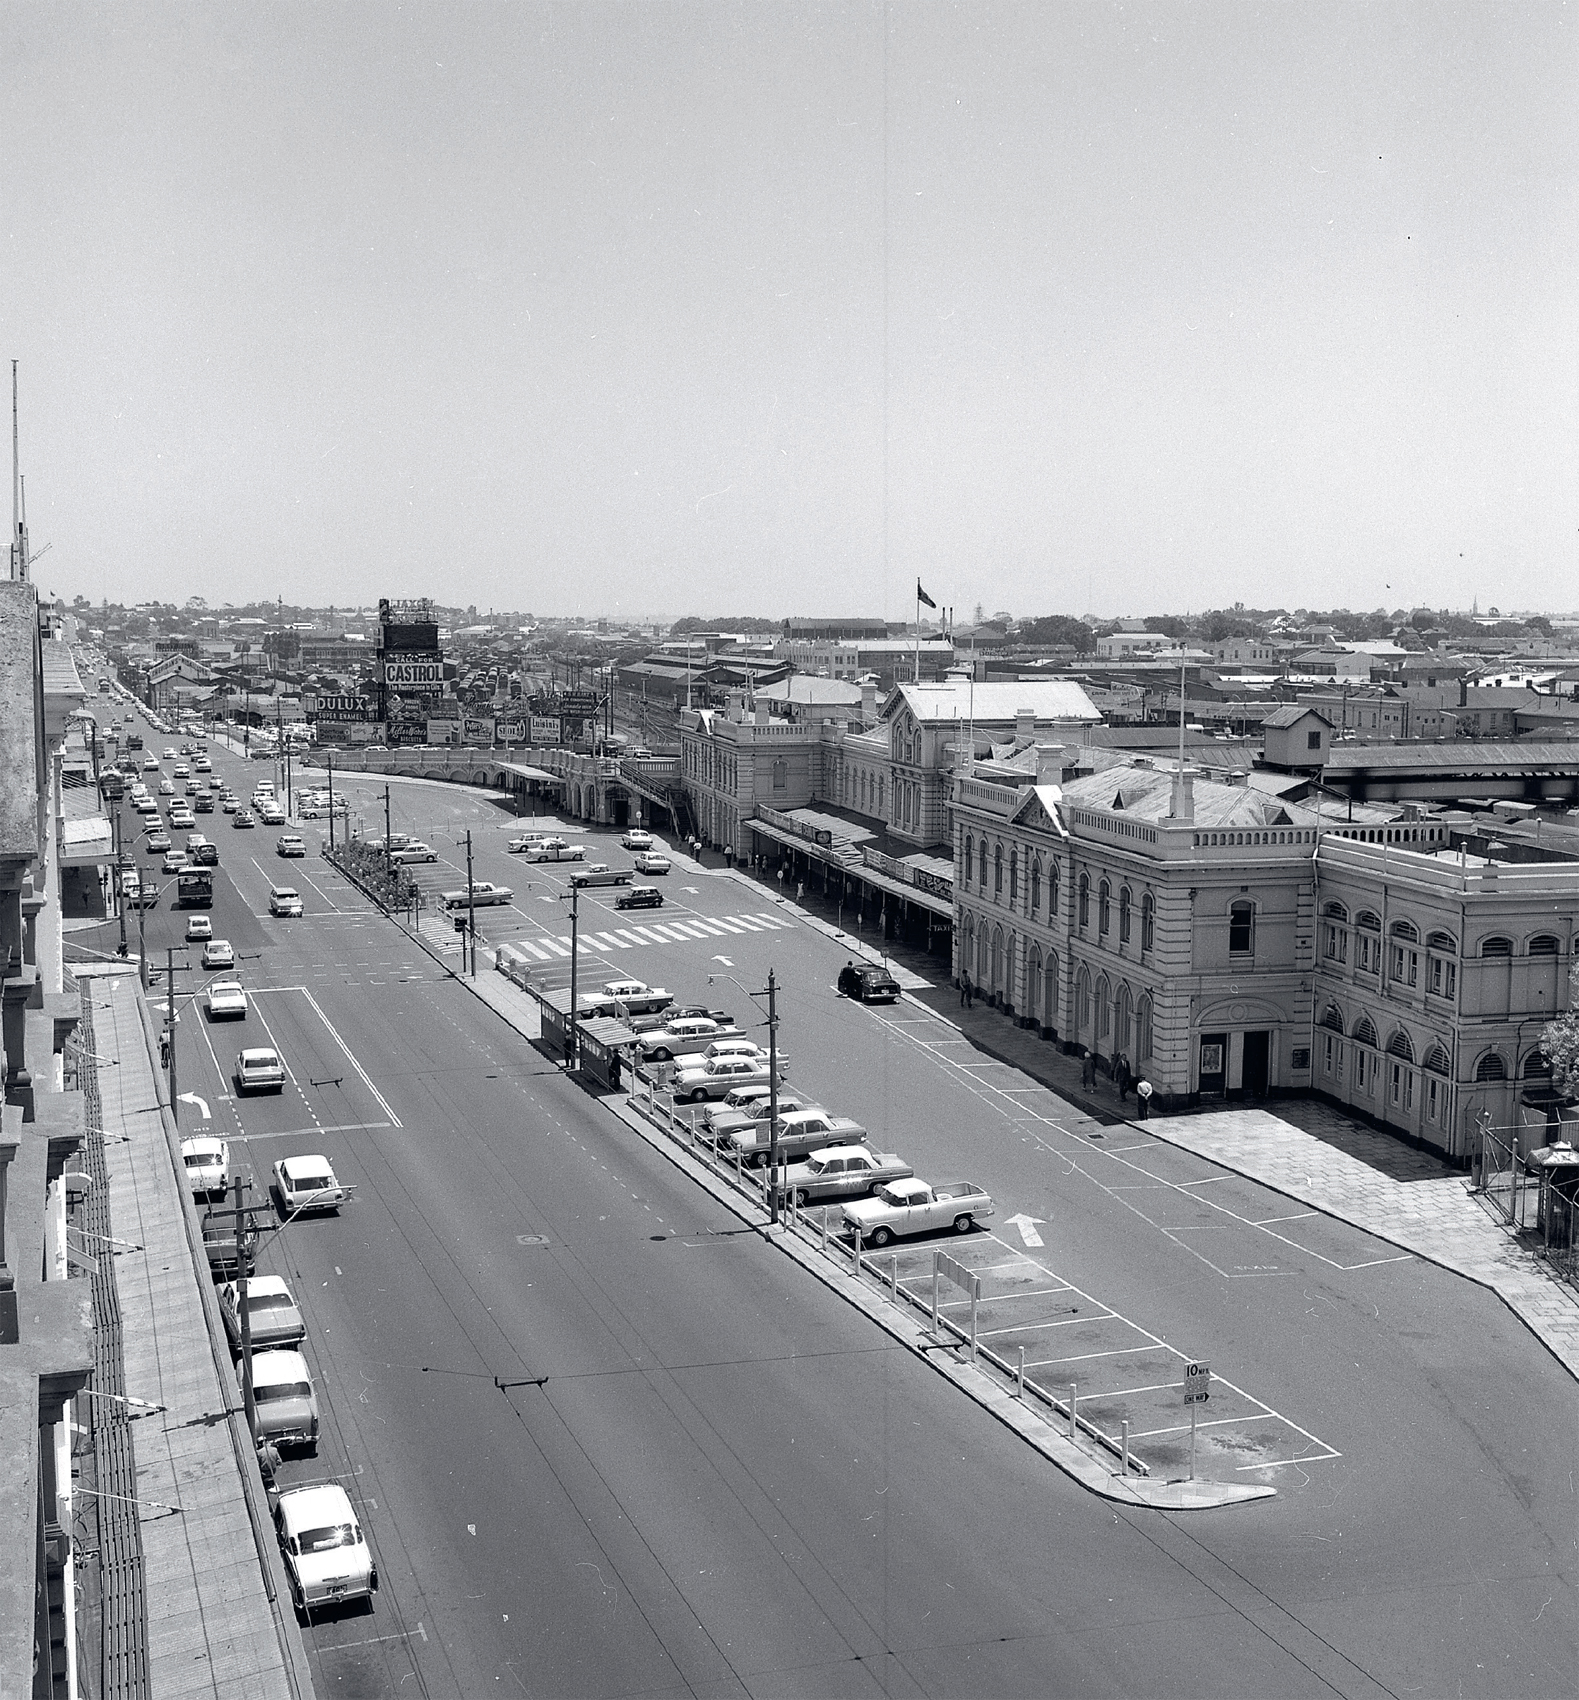 A view of Perth Railway Station in the late 1950s with a low-rise cityscape - photo 5